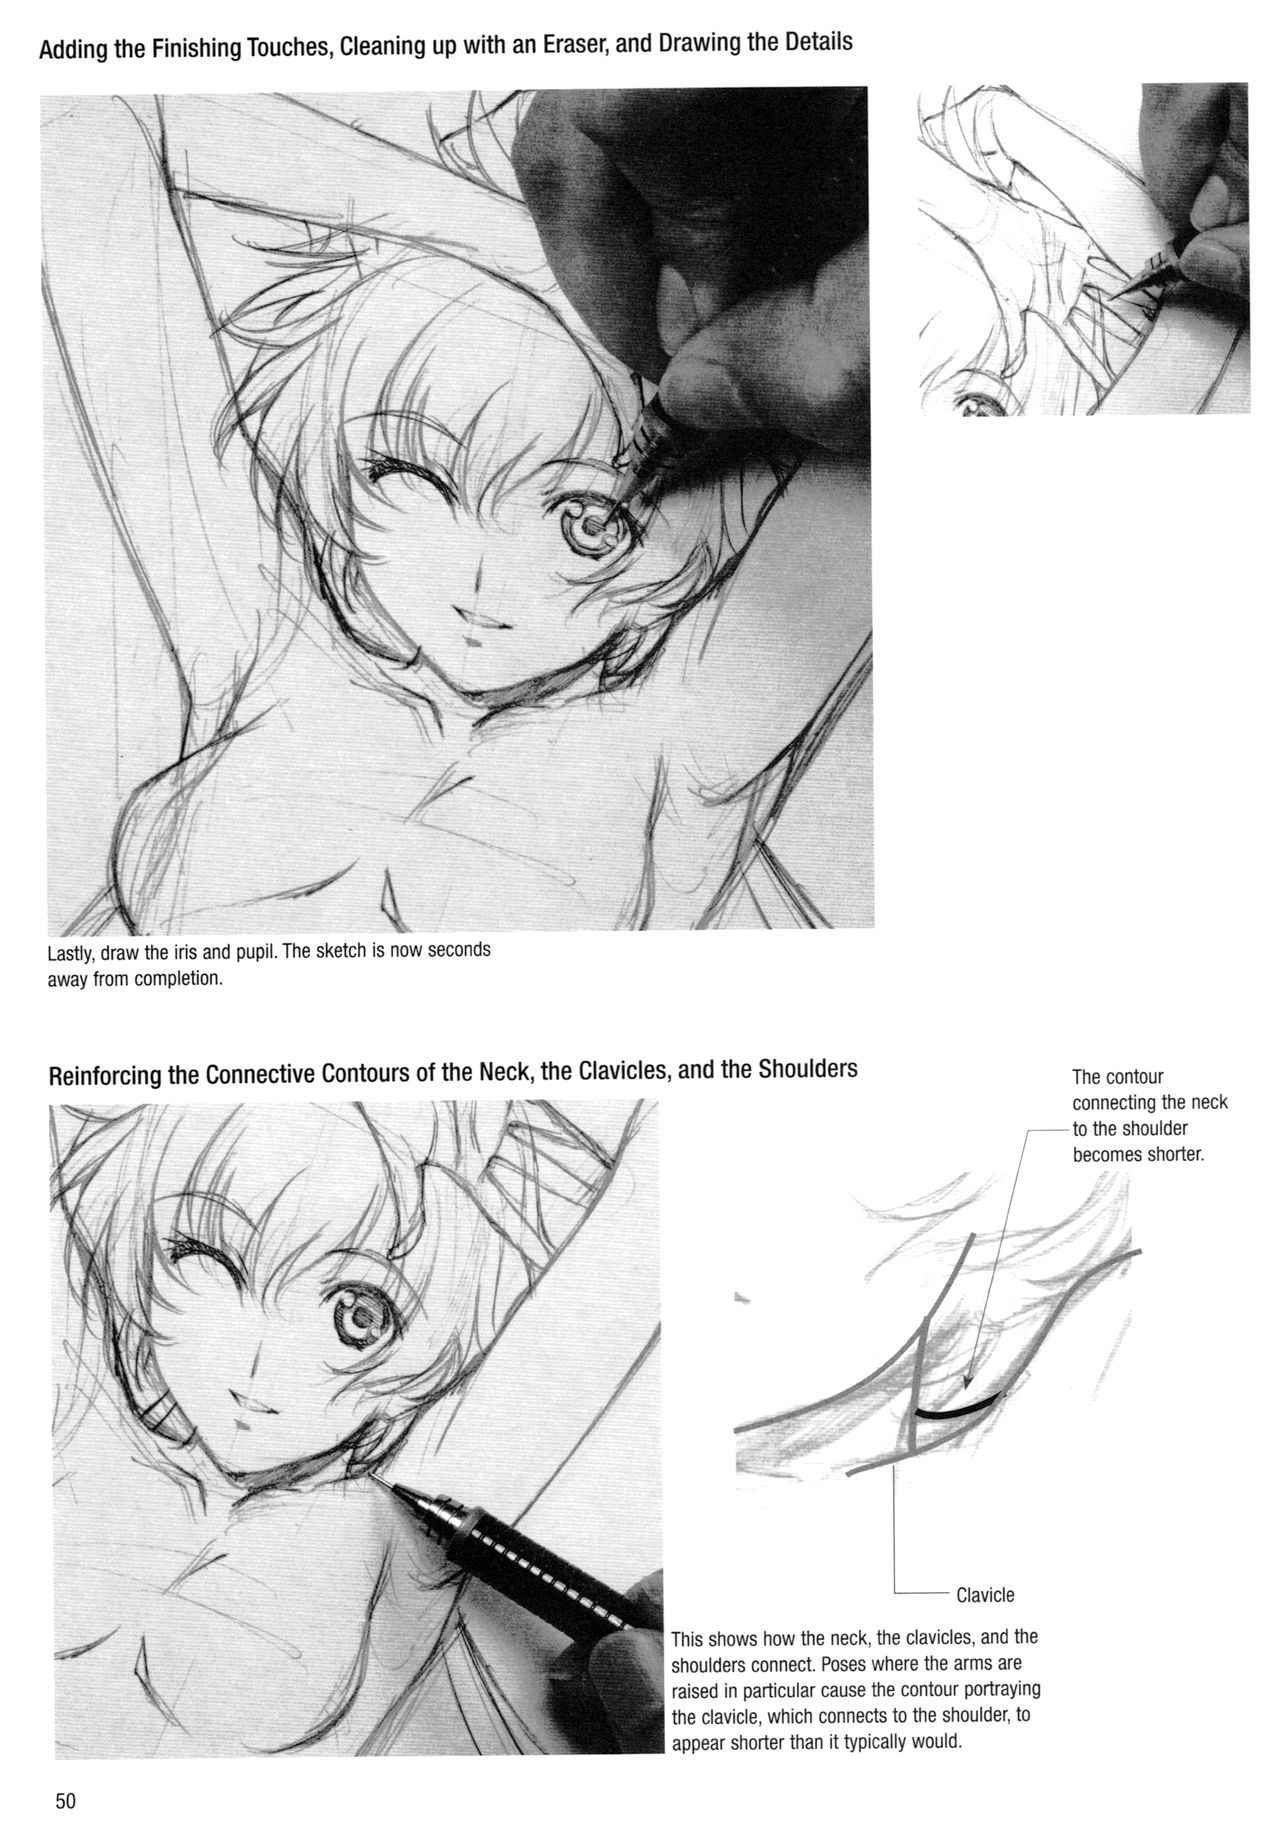 Sketching Manga-Style Vol. 3 - Unforgettable Characters 49